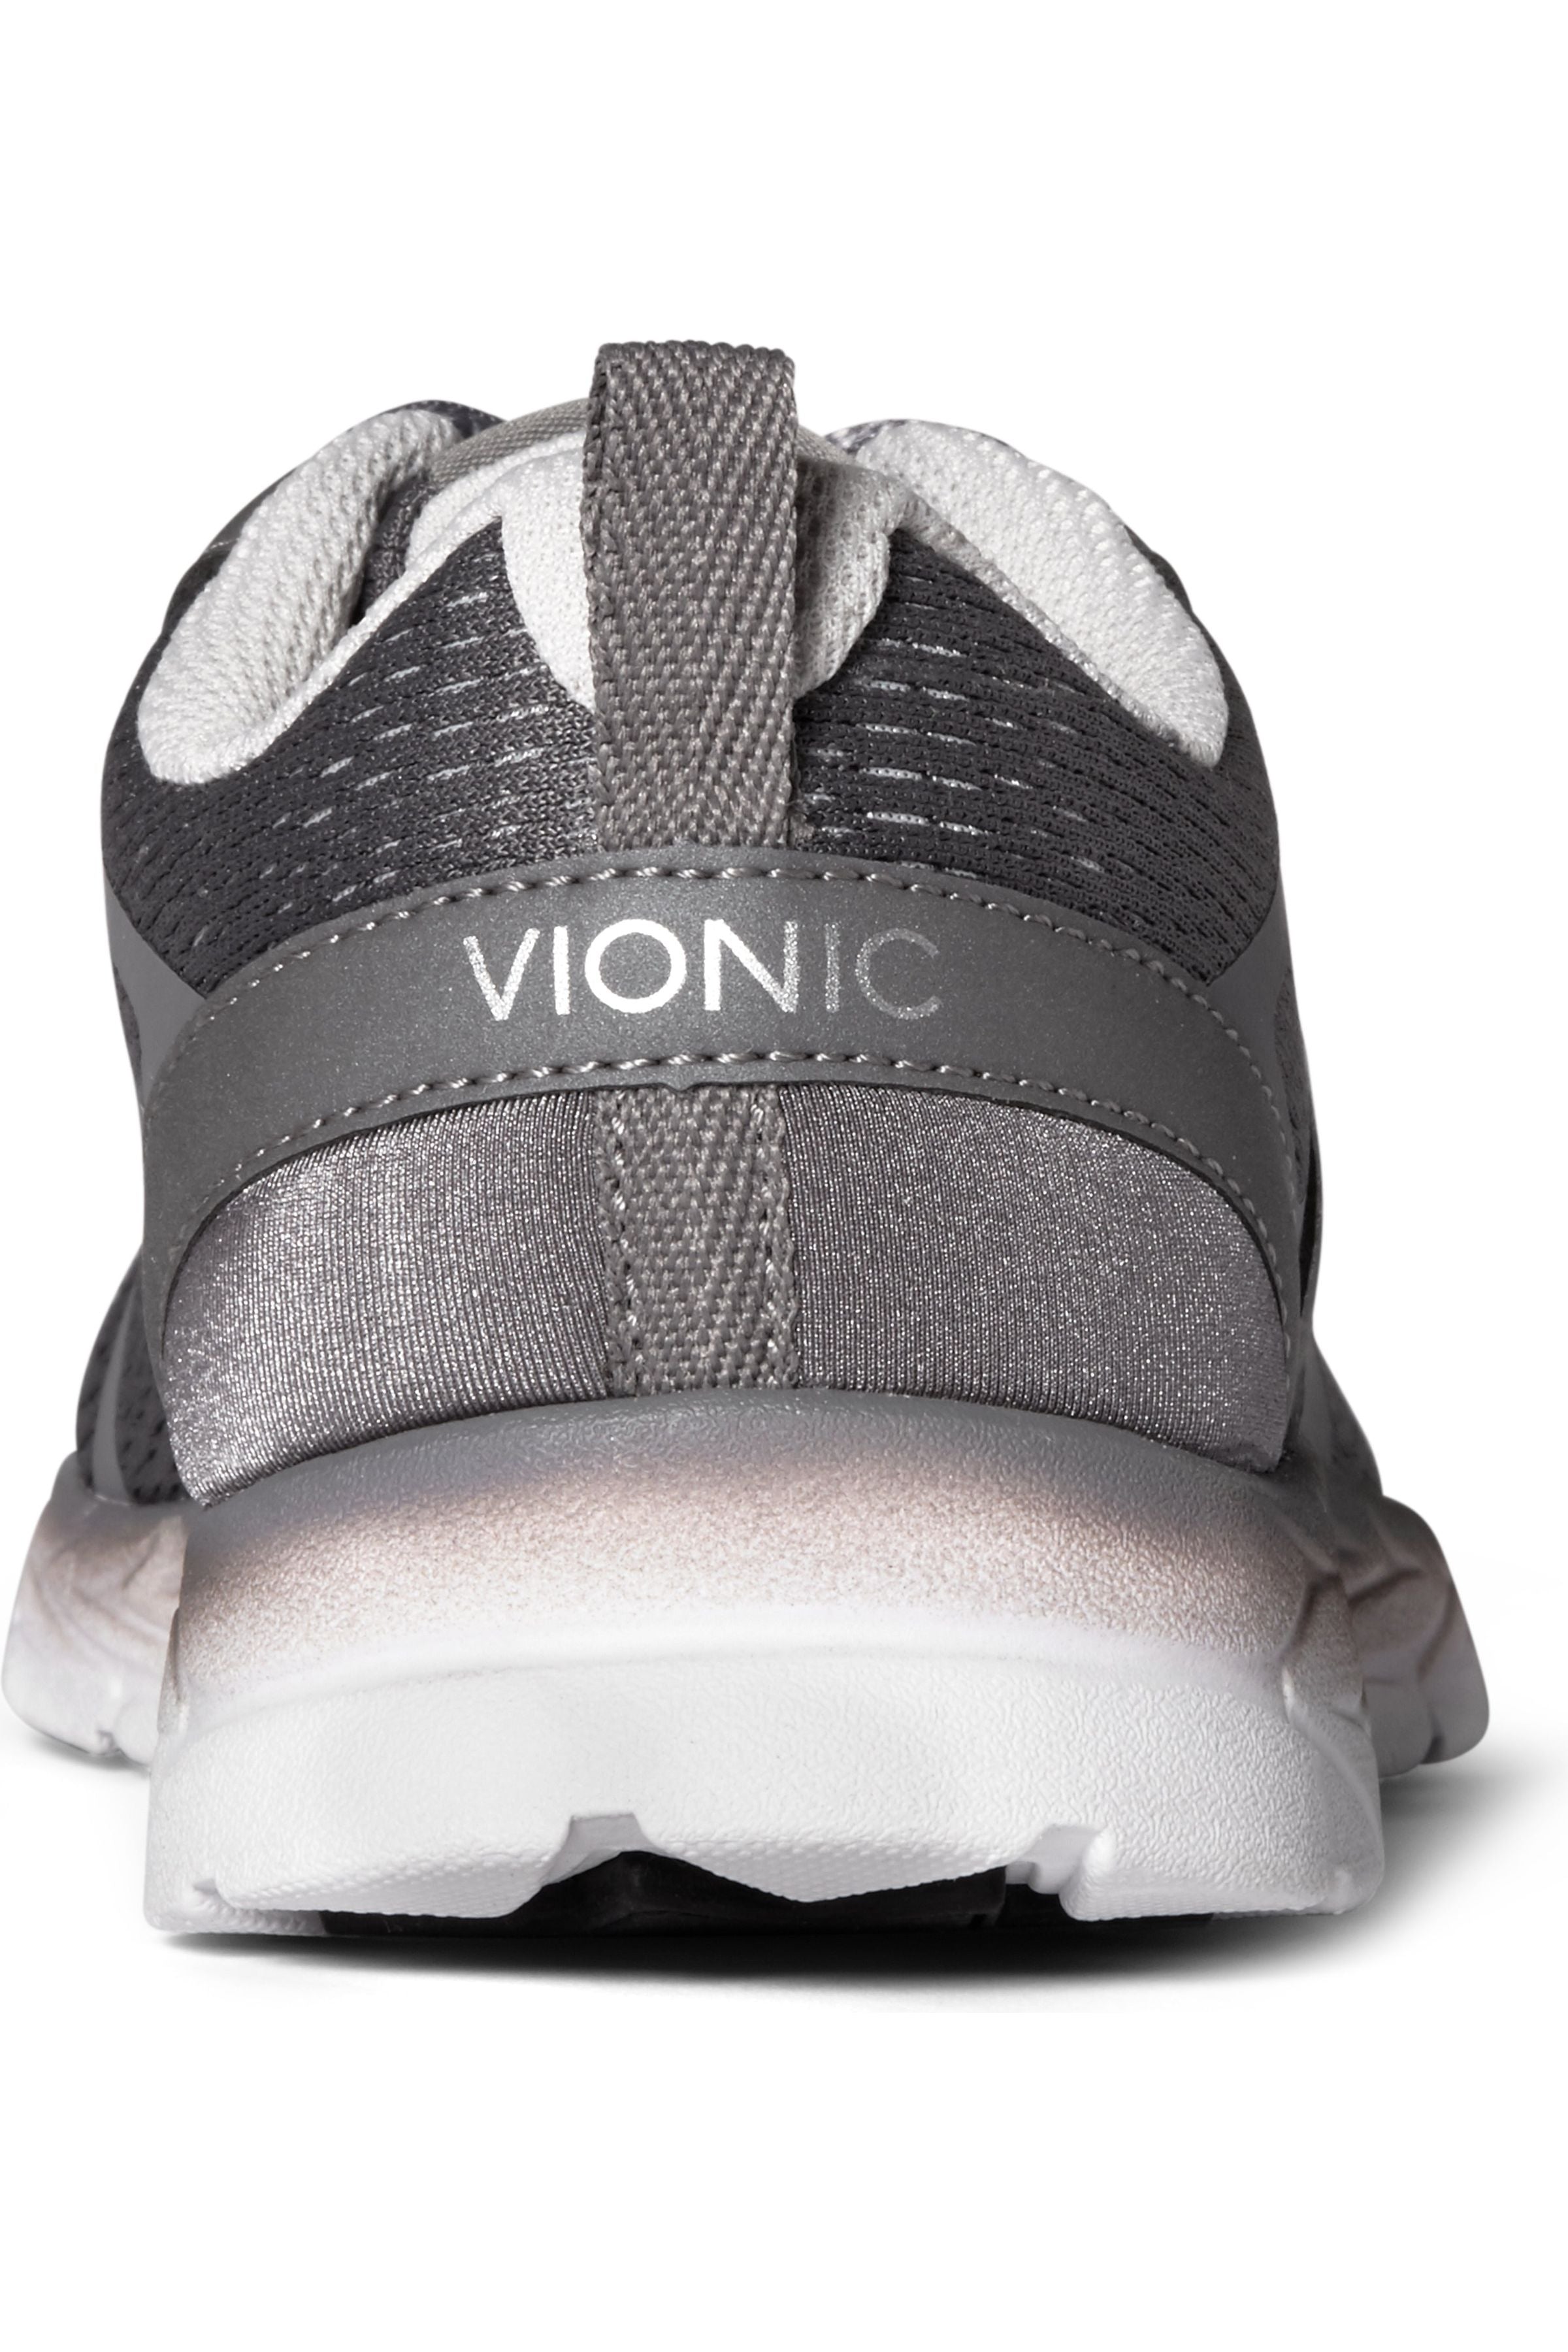 Vionic Brisk Miles Lace-Up Active Sneakers, back, grey